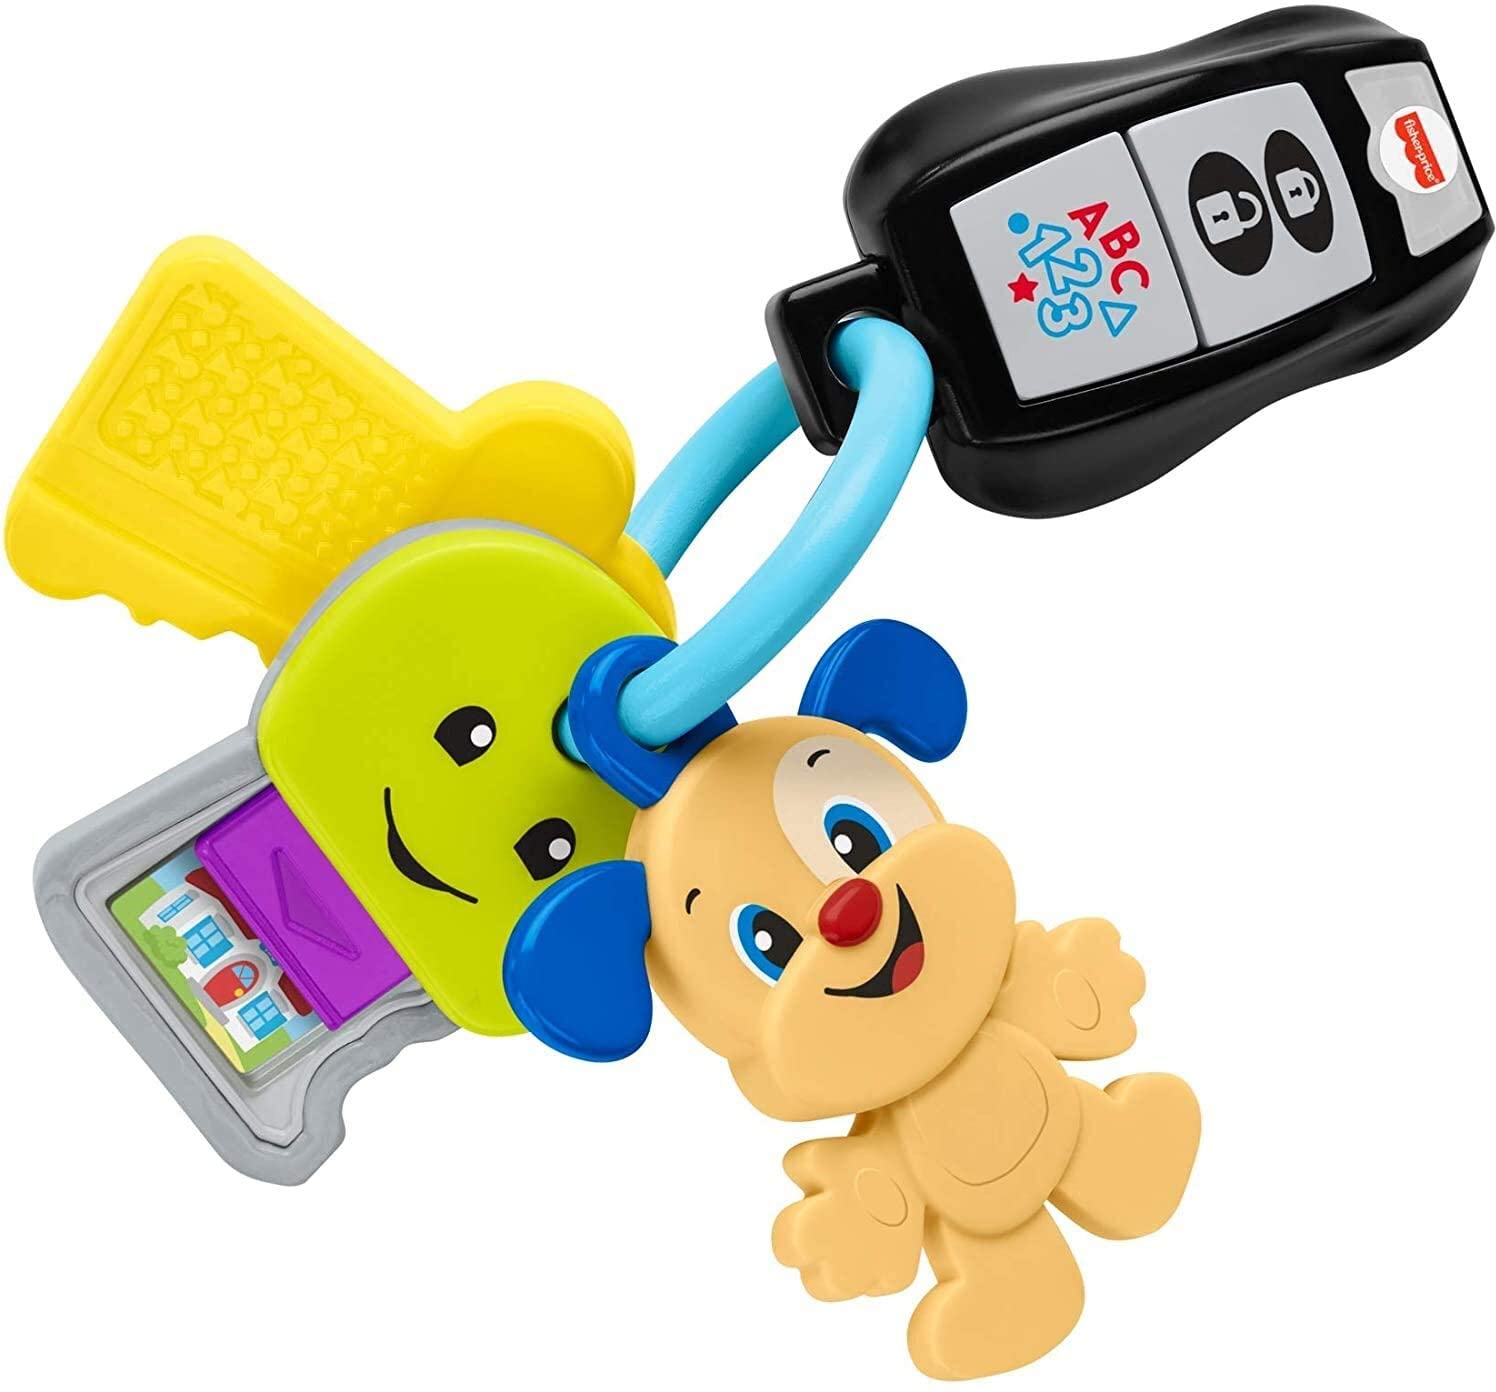 Fisher-Price Laugh & Learn Play & Go Keys $5.92 - Amazon